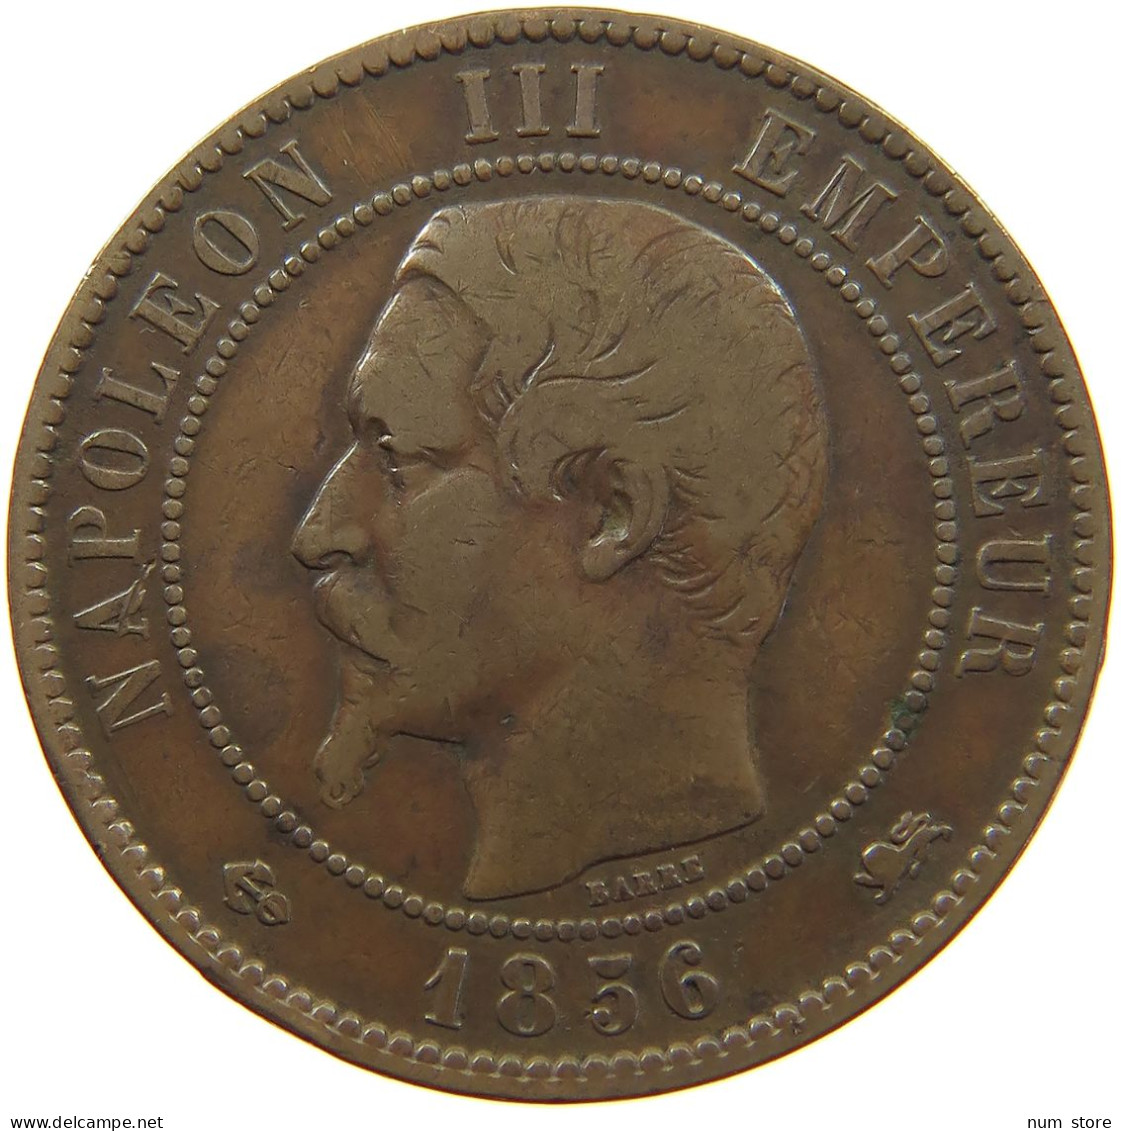 FRANCE 10 CENTIMES 1856 D Napoleon III. (1852-1870) #a059 0355 - 10 Centimes